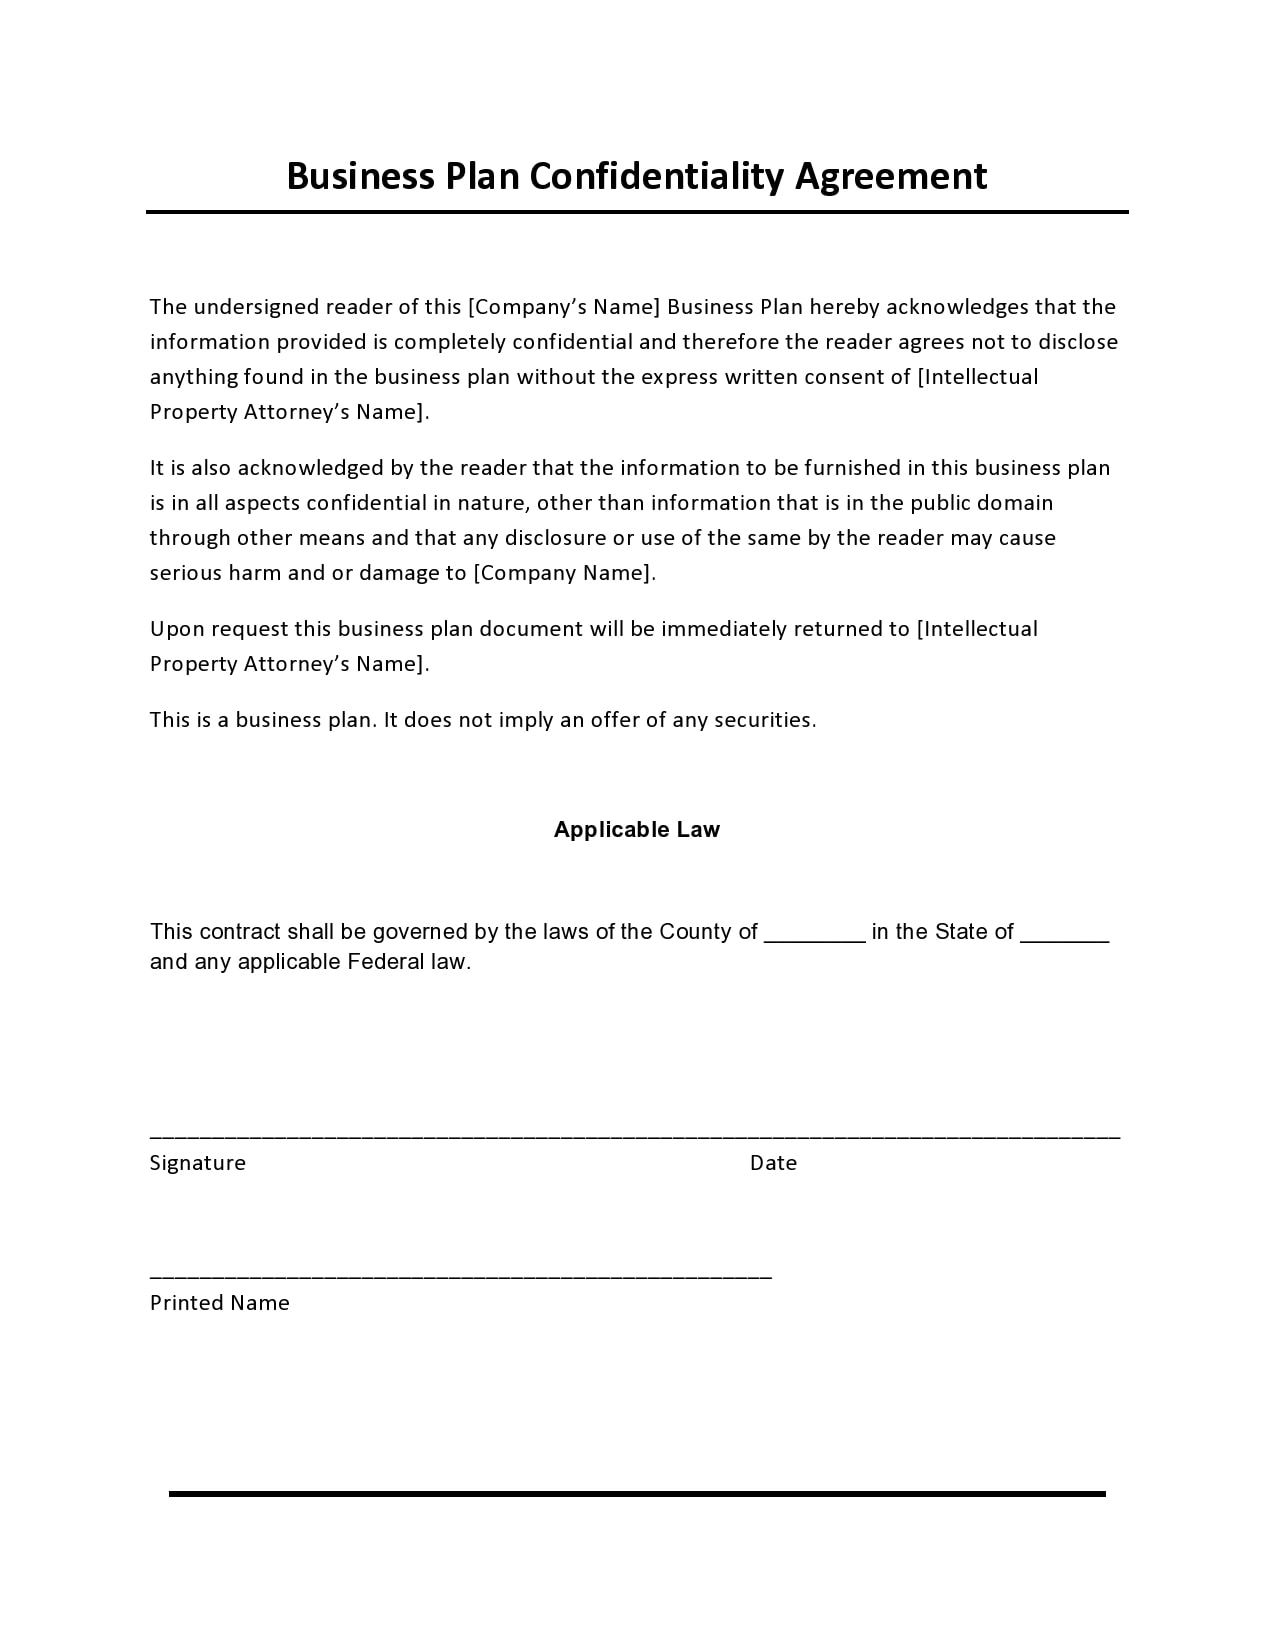 45 Free Confidentiality Agreement Templates Nda Templatearchive